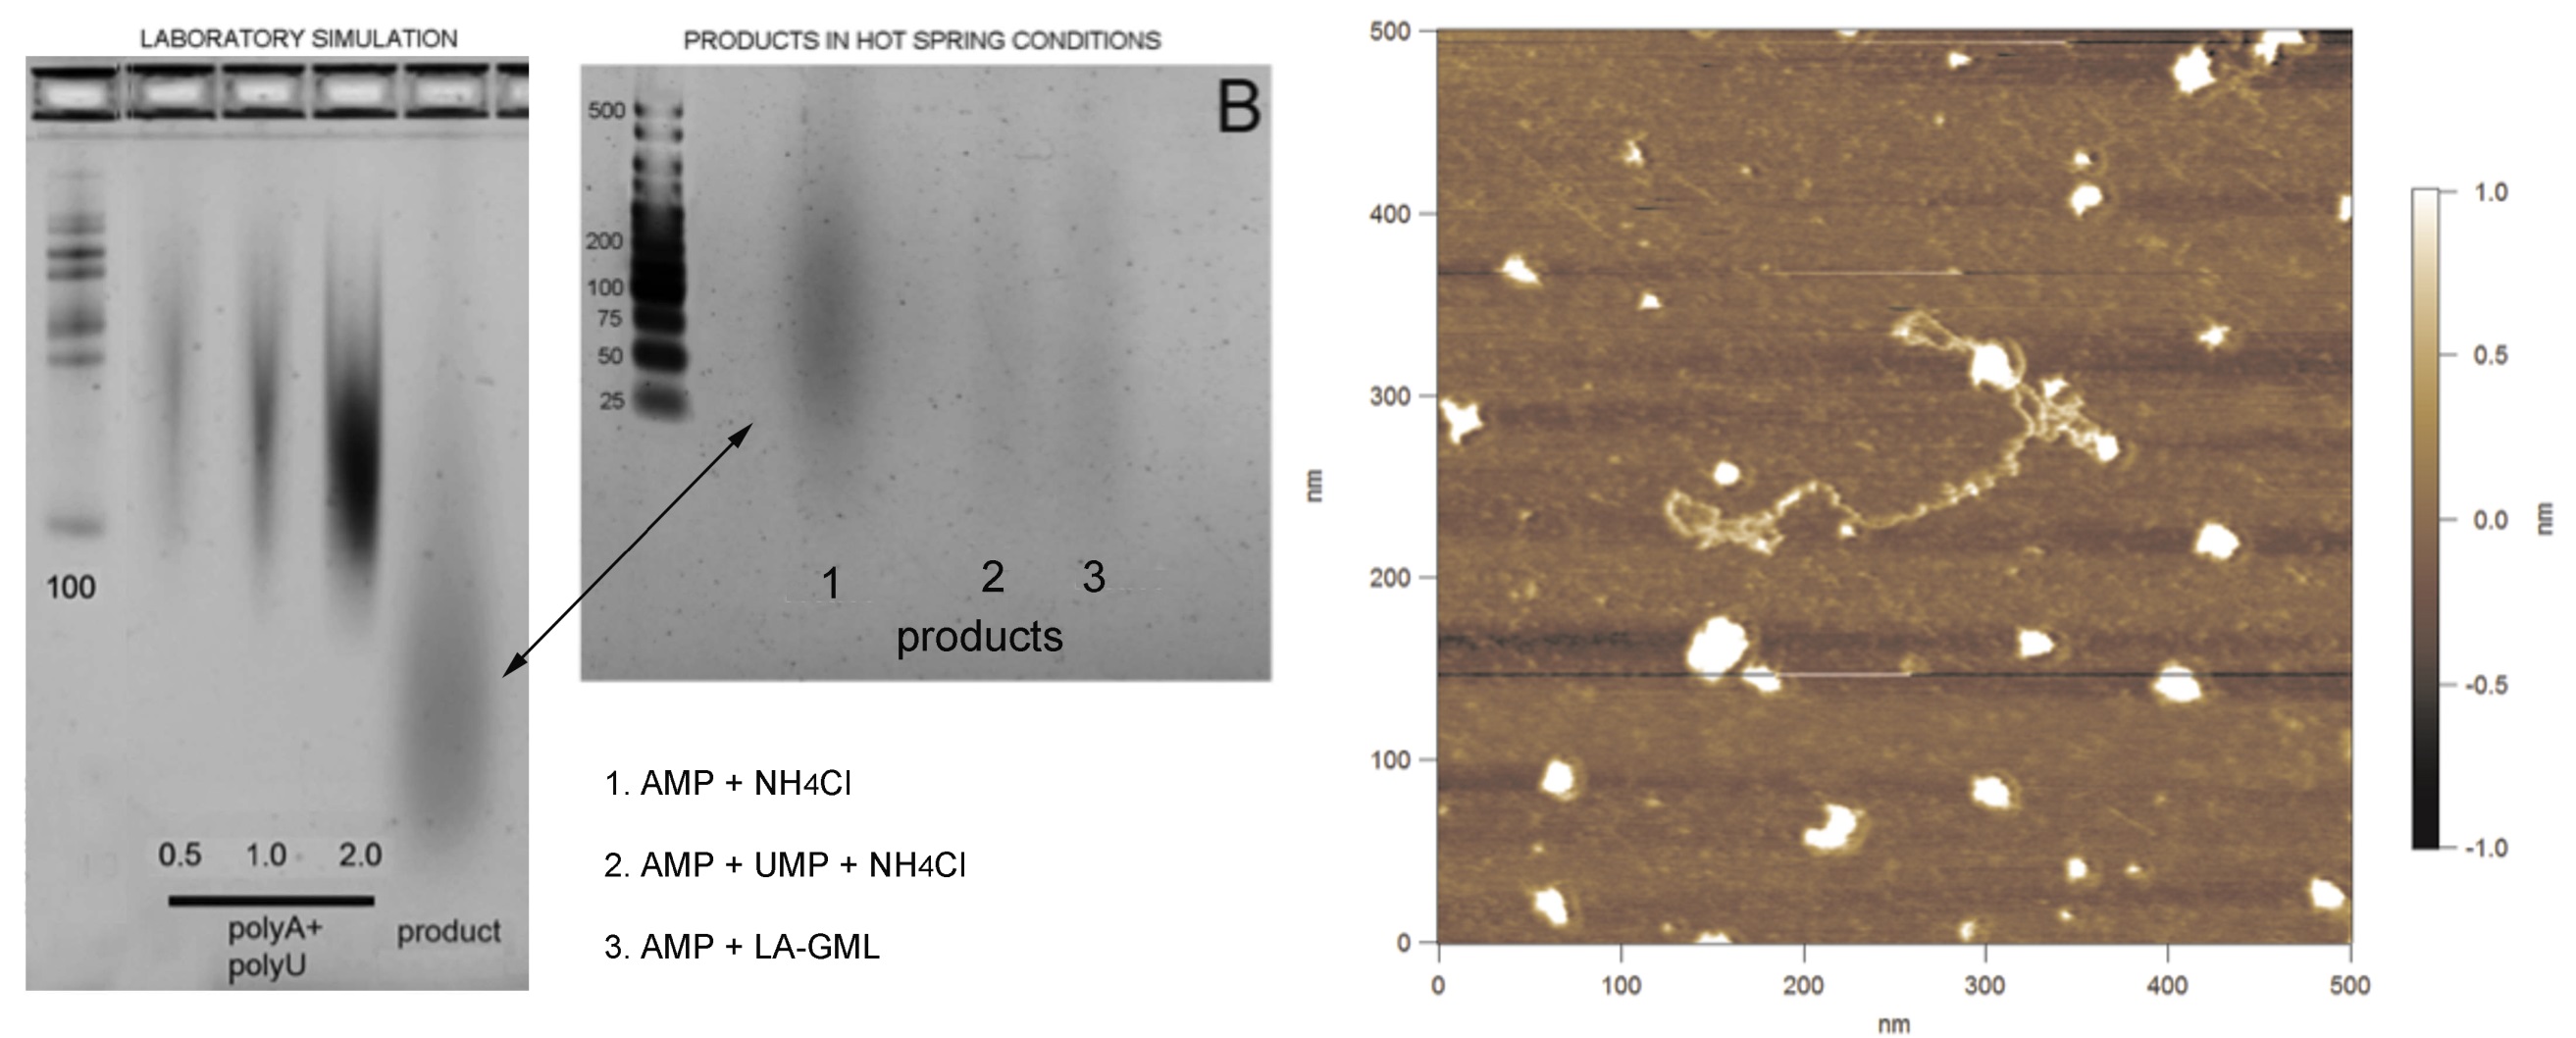 gel electrophoresis and atomic force microscopy images